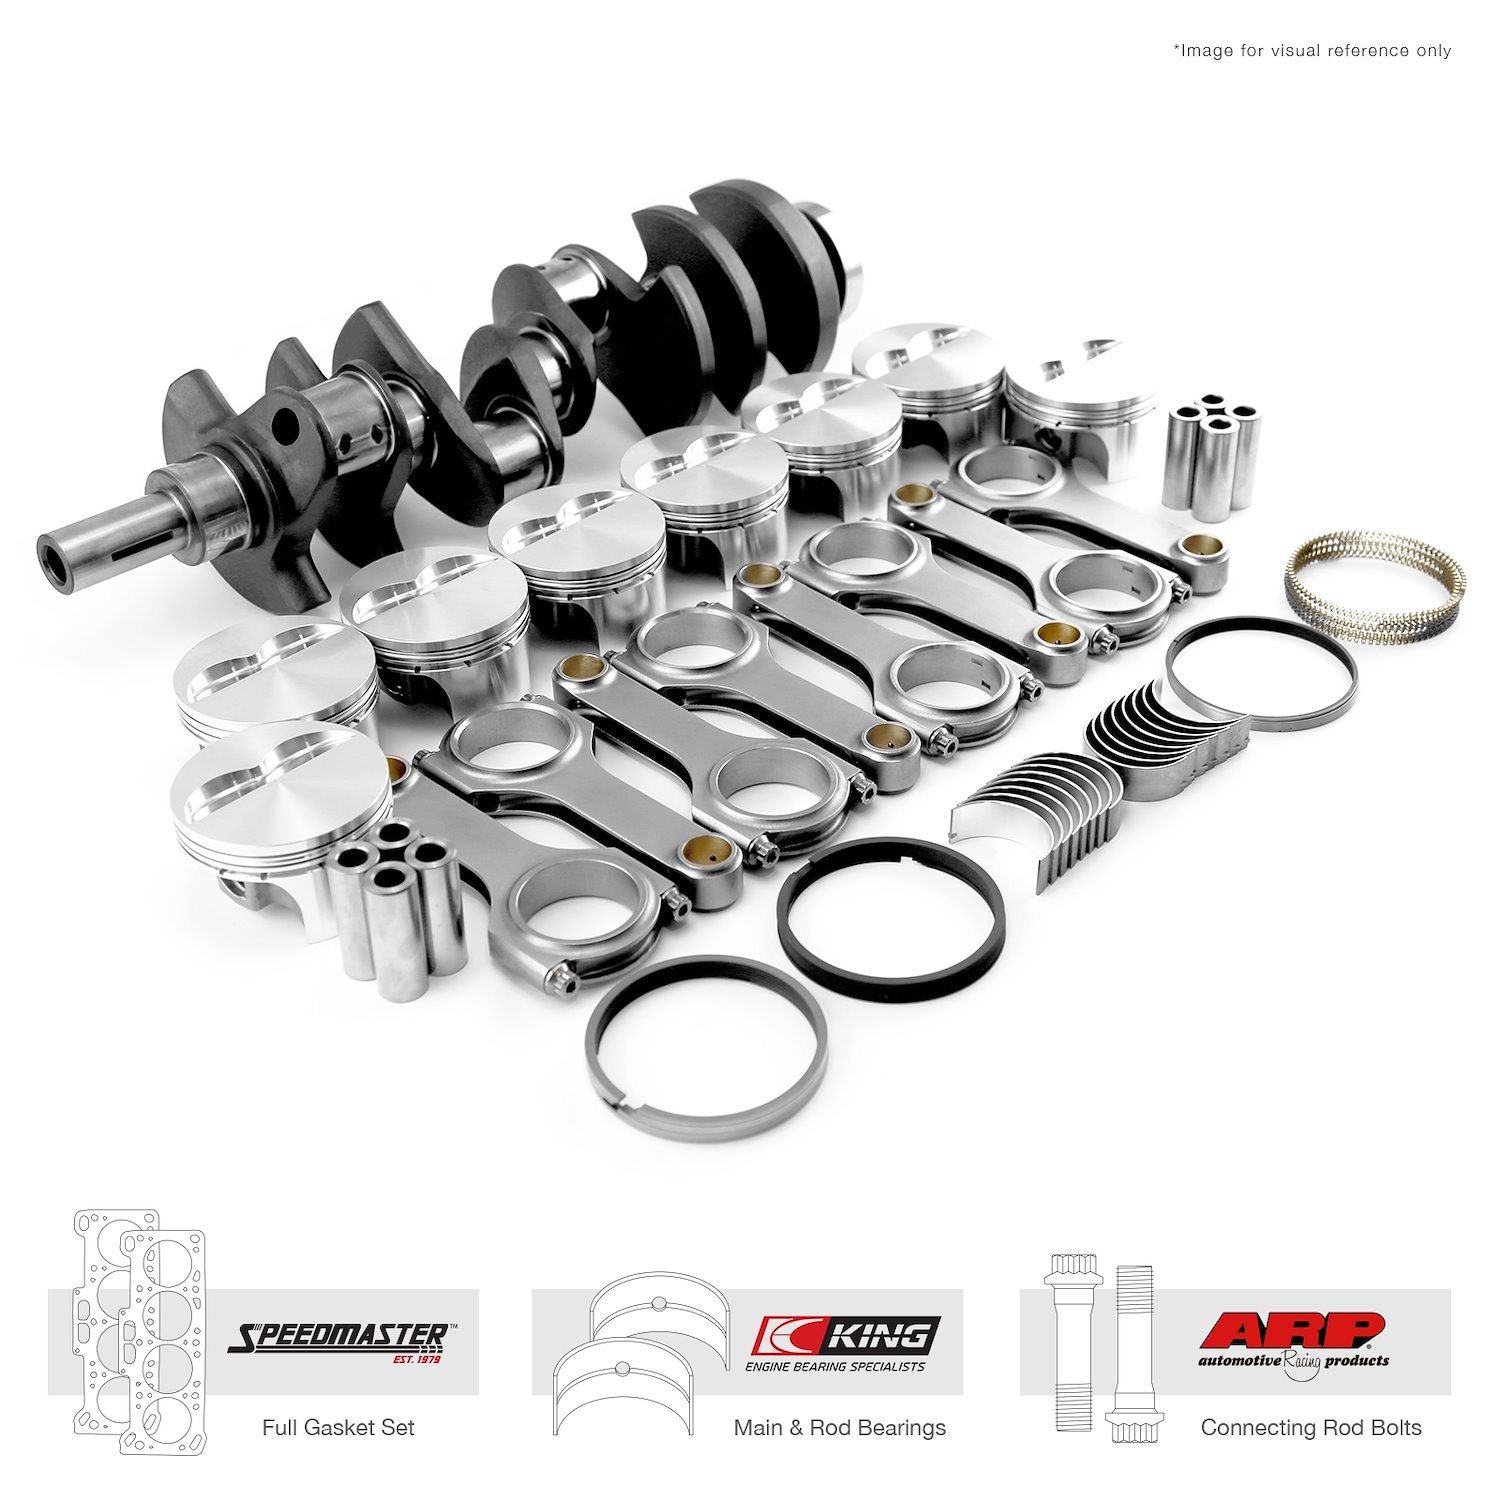 1-290-010 Ford 351W Windsor 3.850 in. 393 ci Rotating Assembly Kit - Outlaw Series